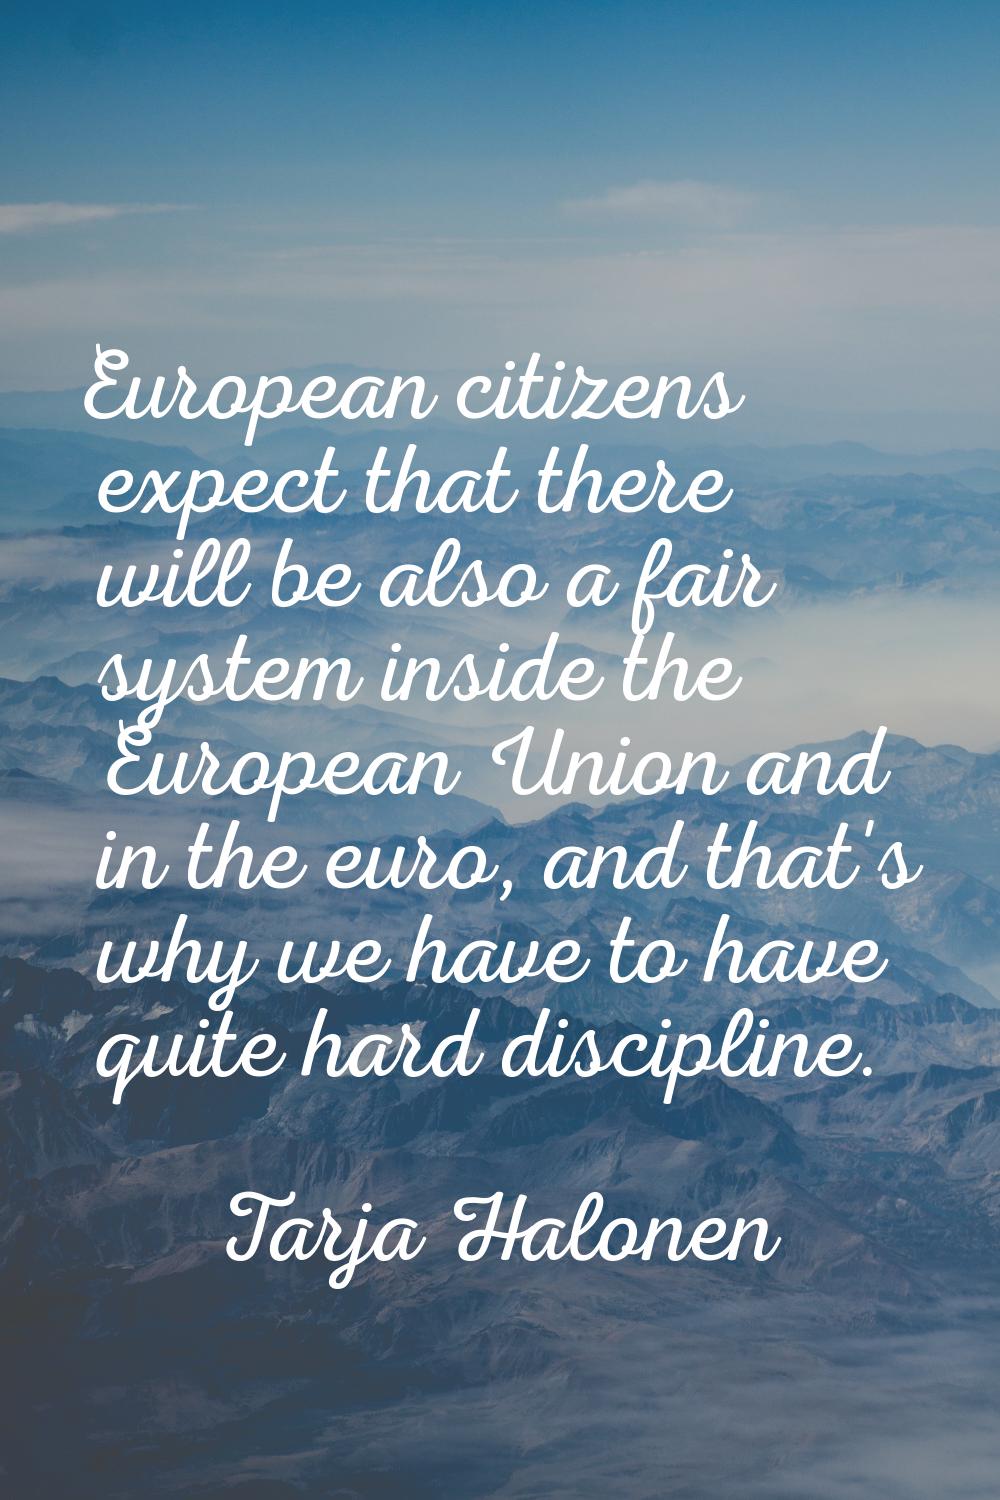 European citizens expect that there will be also a fair system inside the European Union and in the